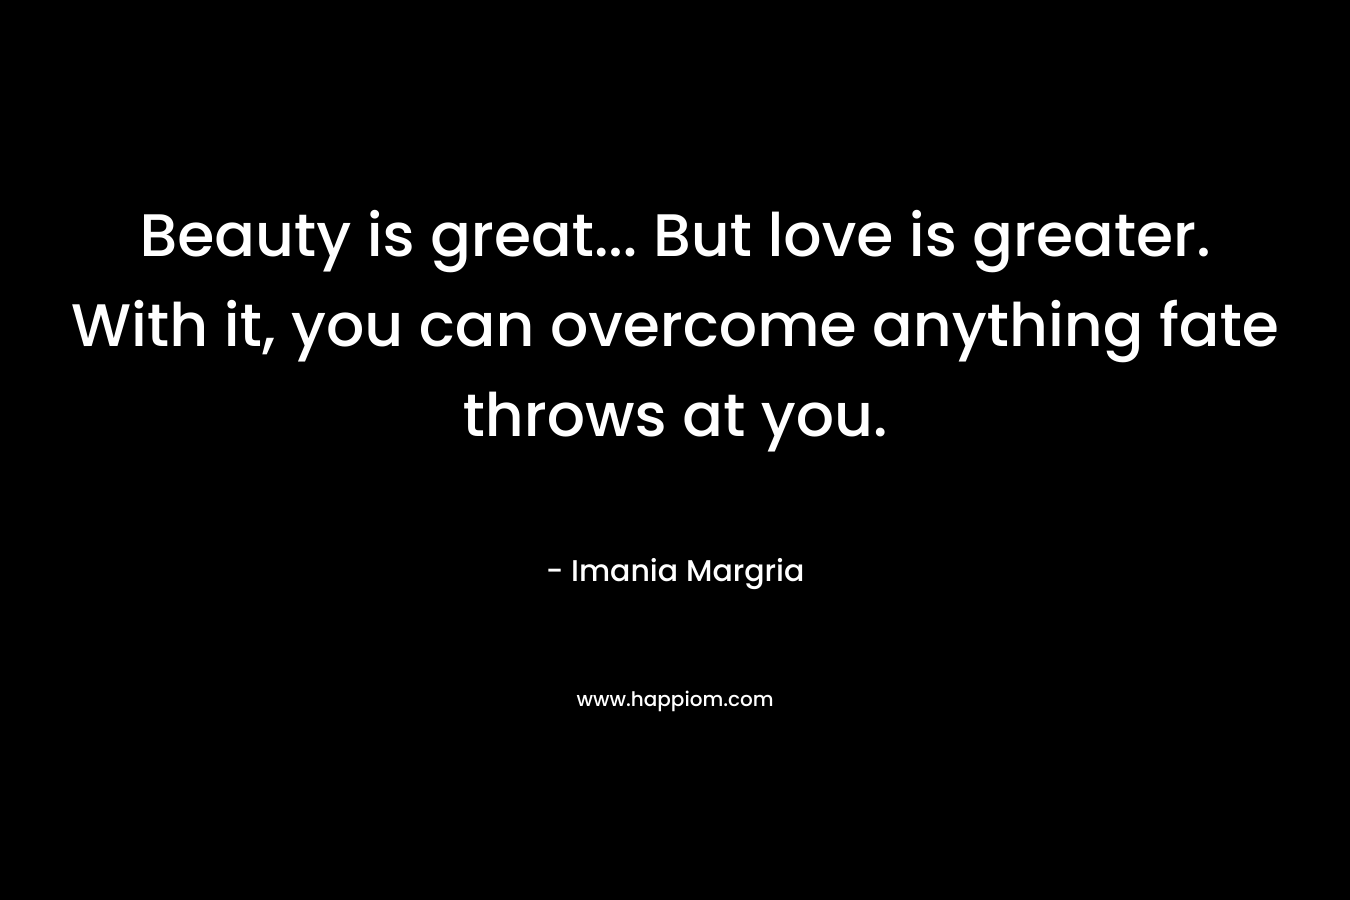 Beauty is great... But love is greater. With it, you can overcome anything fate throws at you.